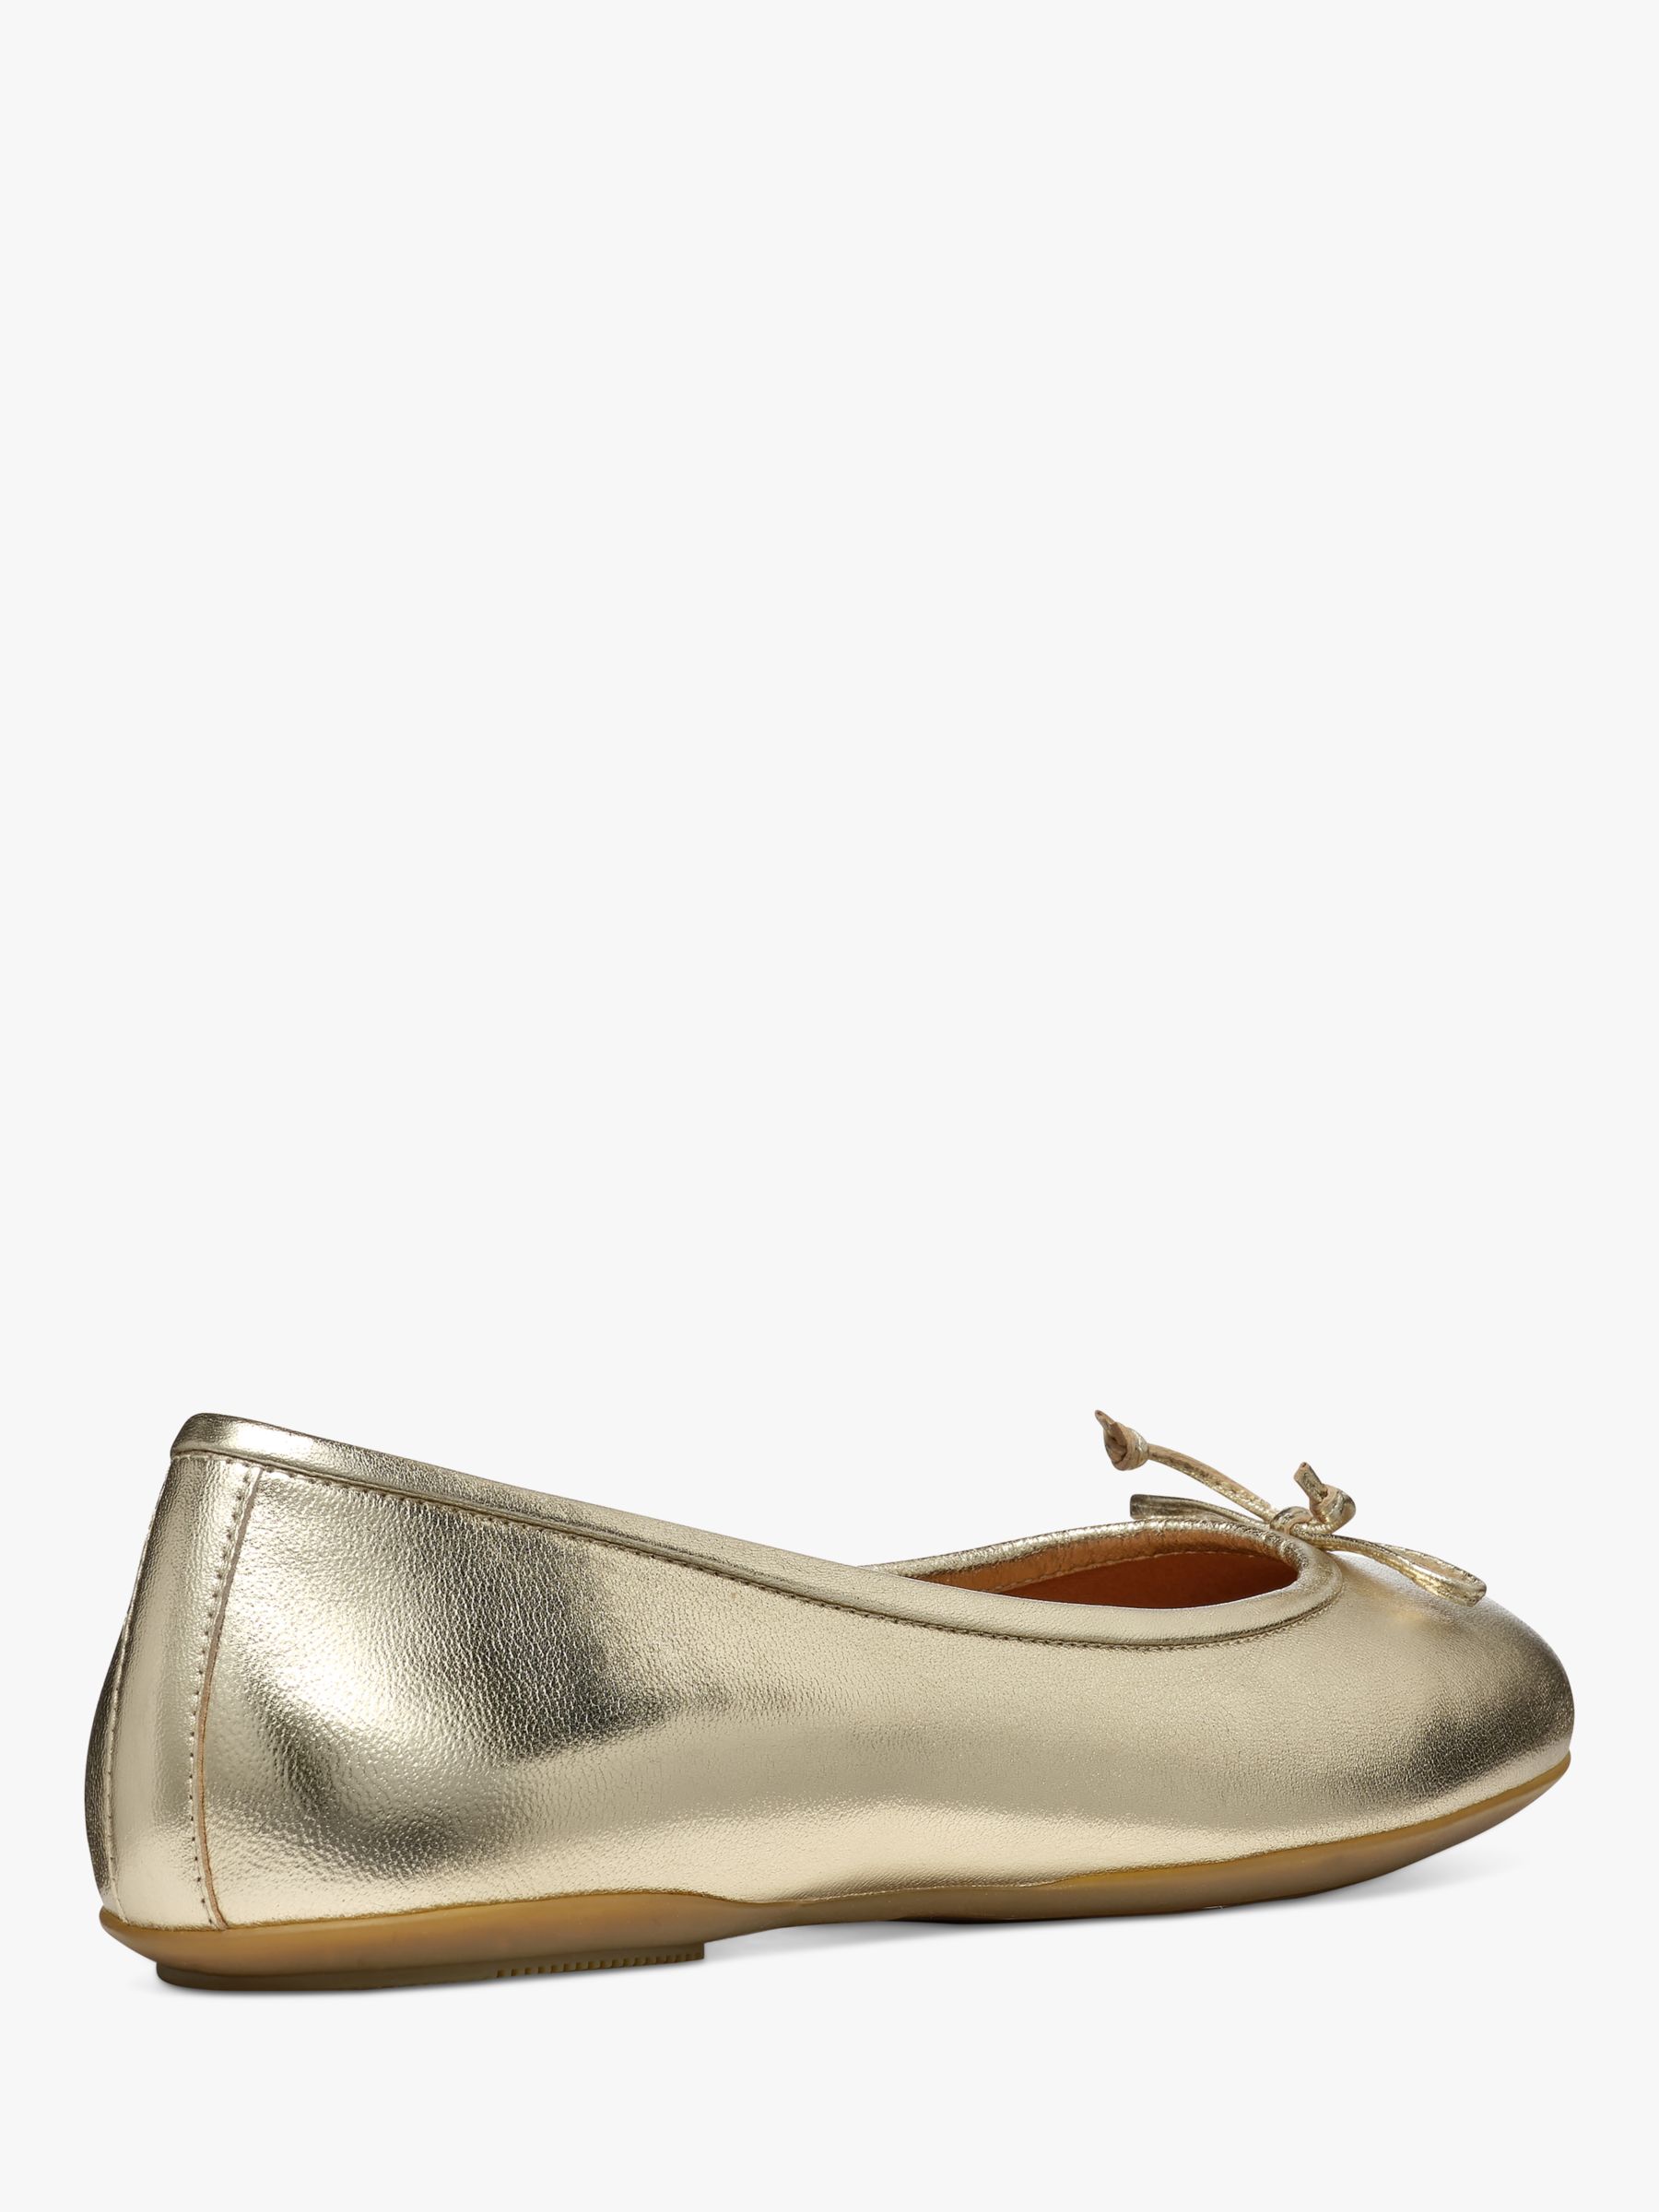 Geox Palmaria Leather Ballerina Shoes, Gold at John Lewis & Partners